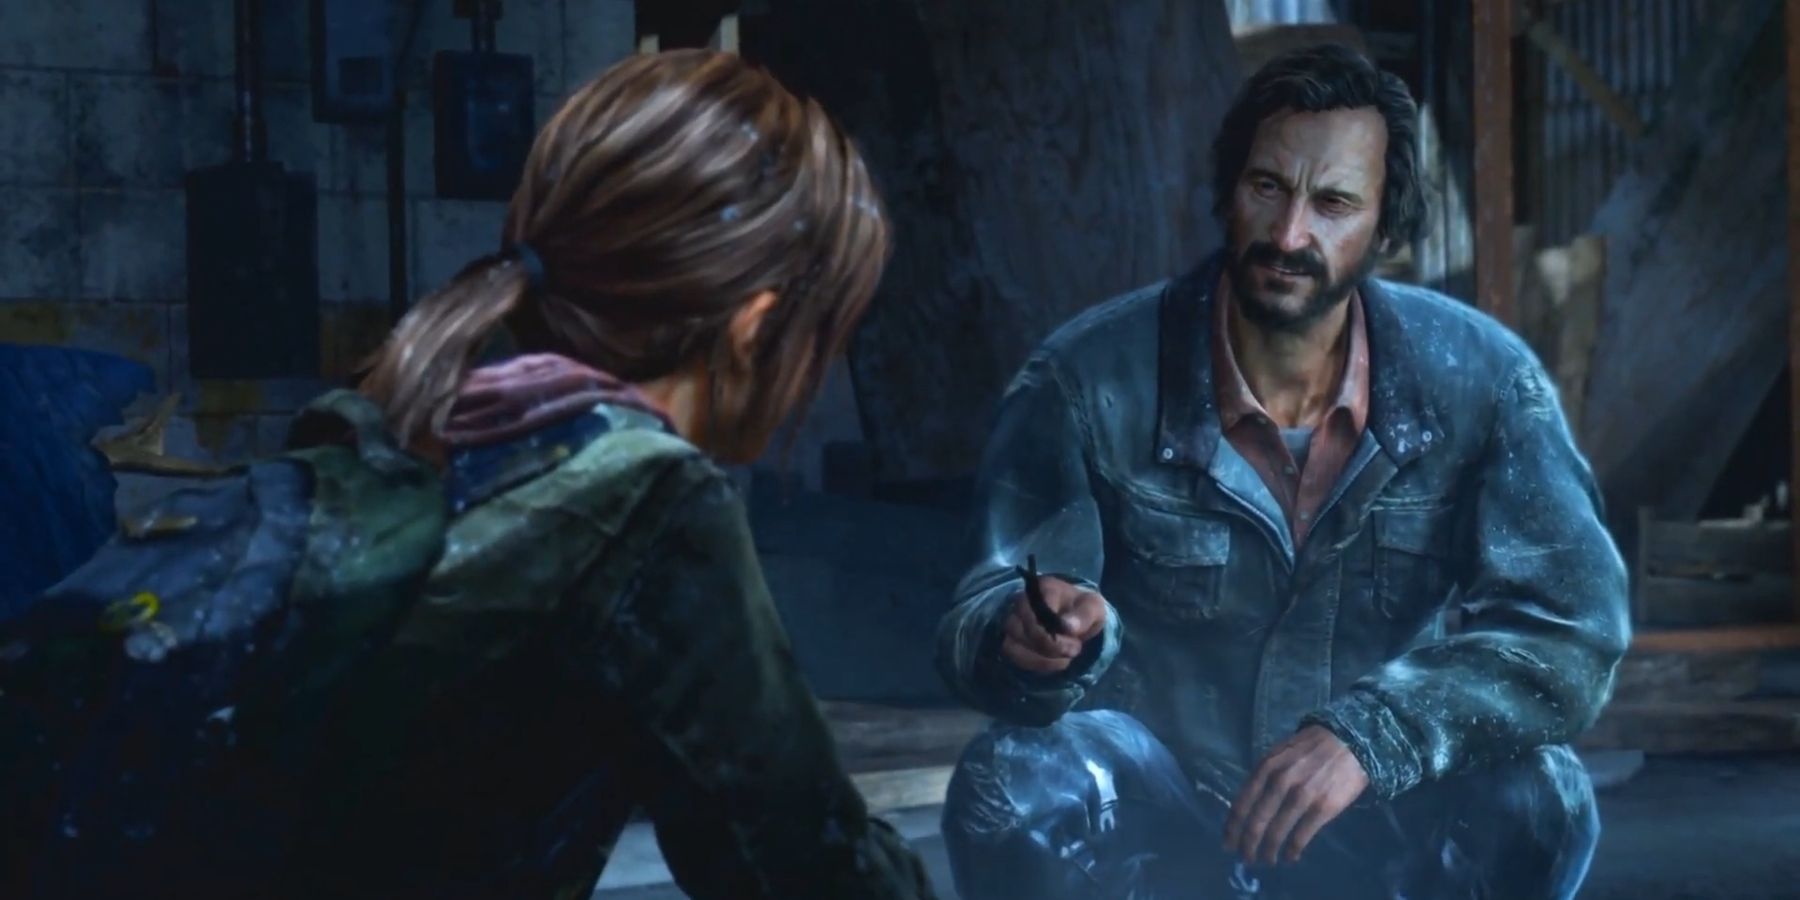 Ellie talking with David around a campfire in The Last Of Us